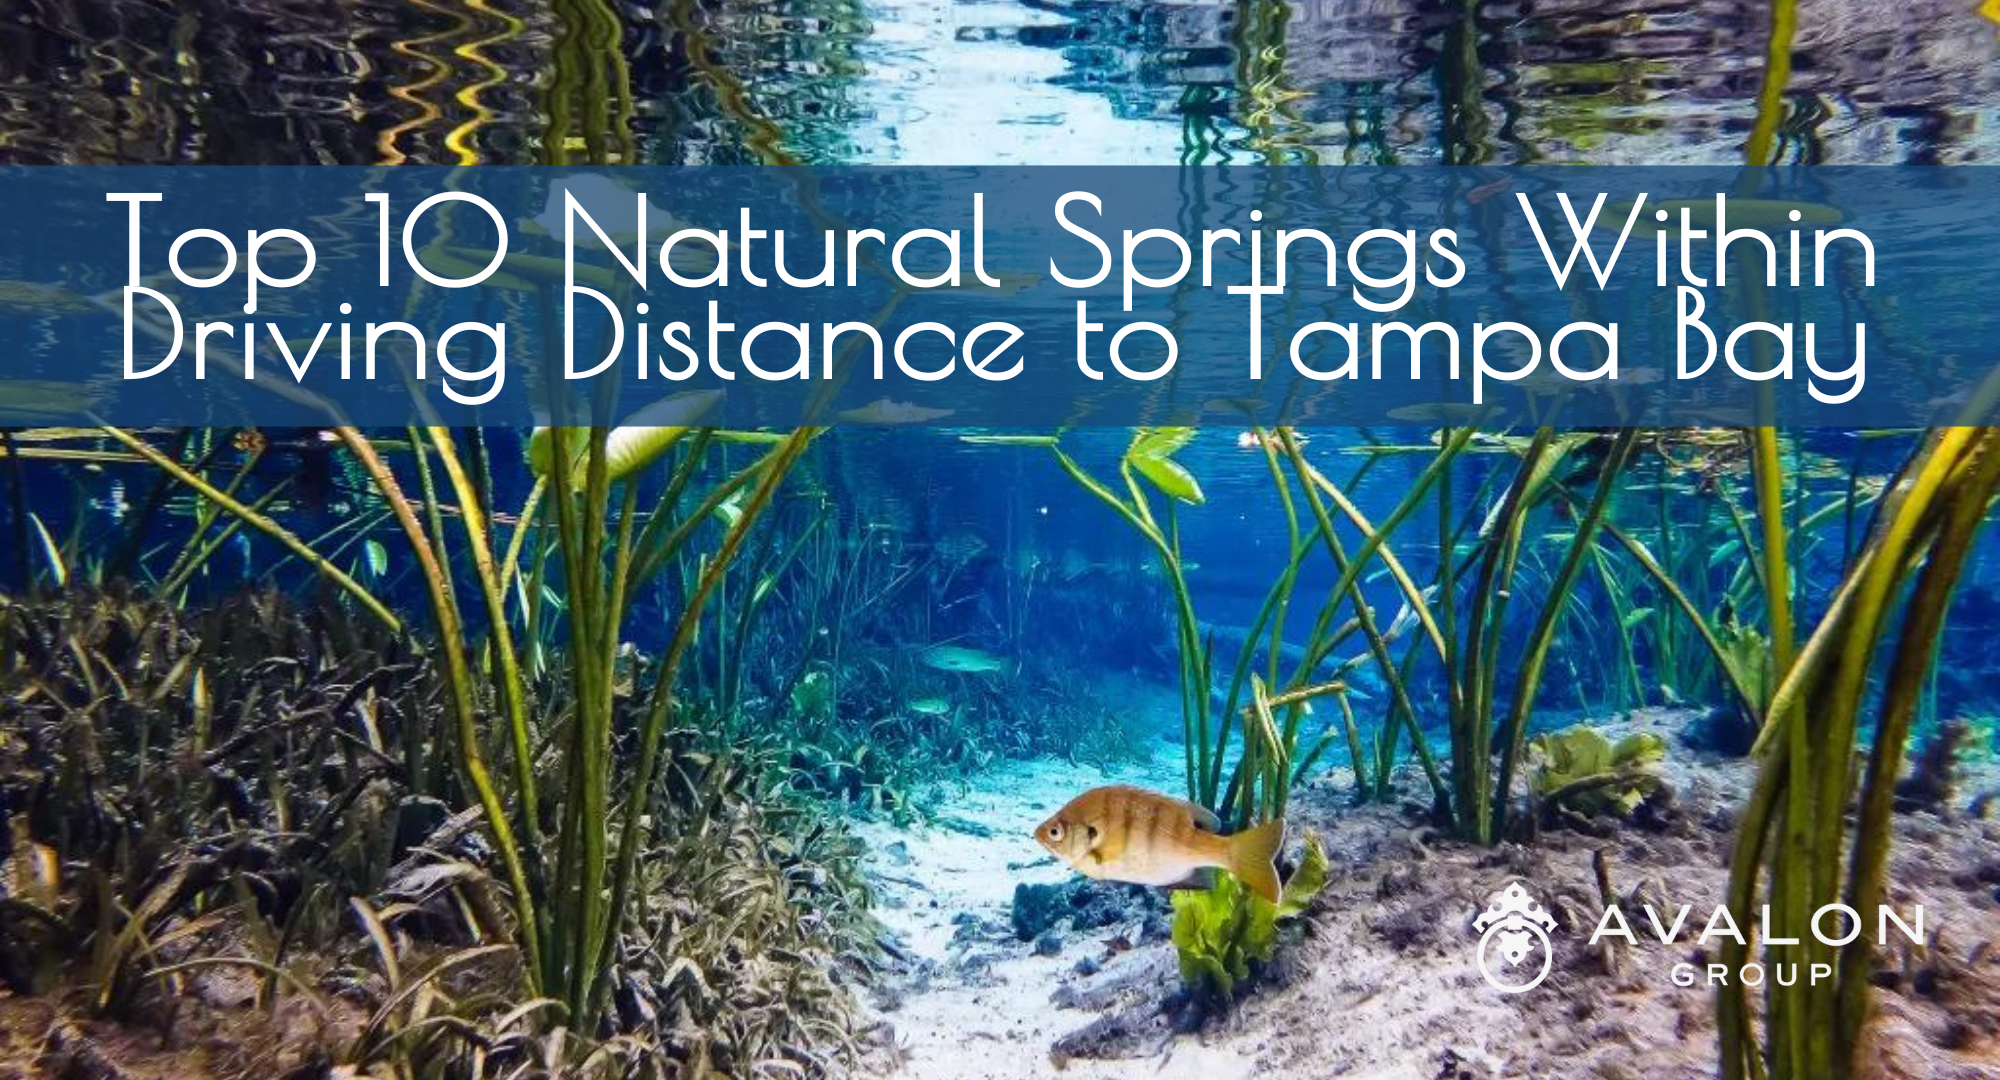 Top 10 Natural Springs Within Driving Distance to Tampa Bay. The water is crystal clear and blue with a yellow fish swimming.